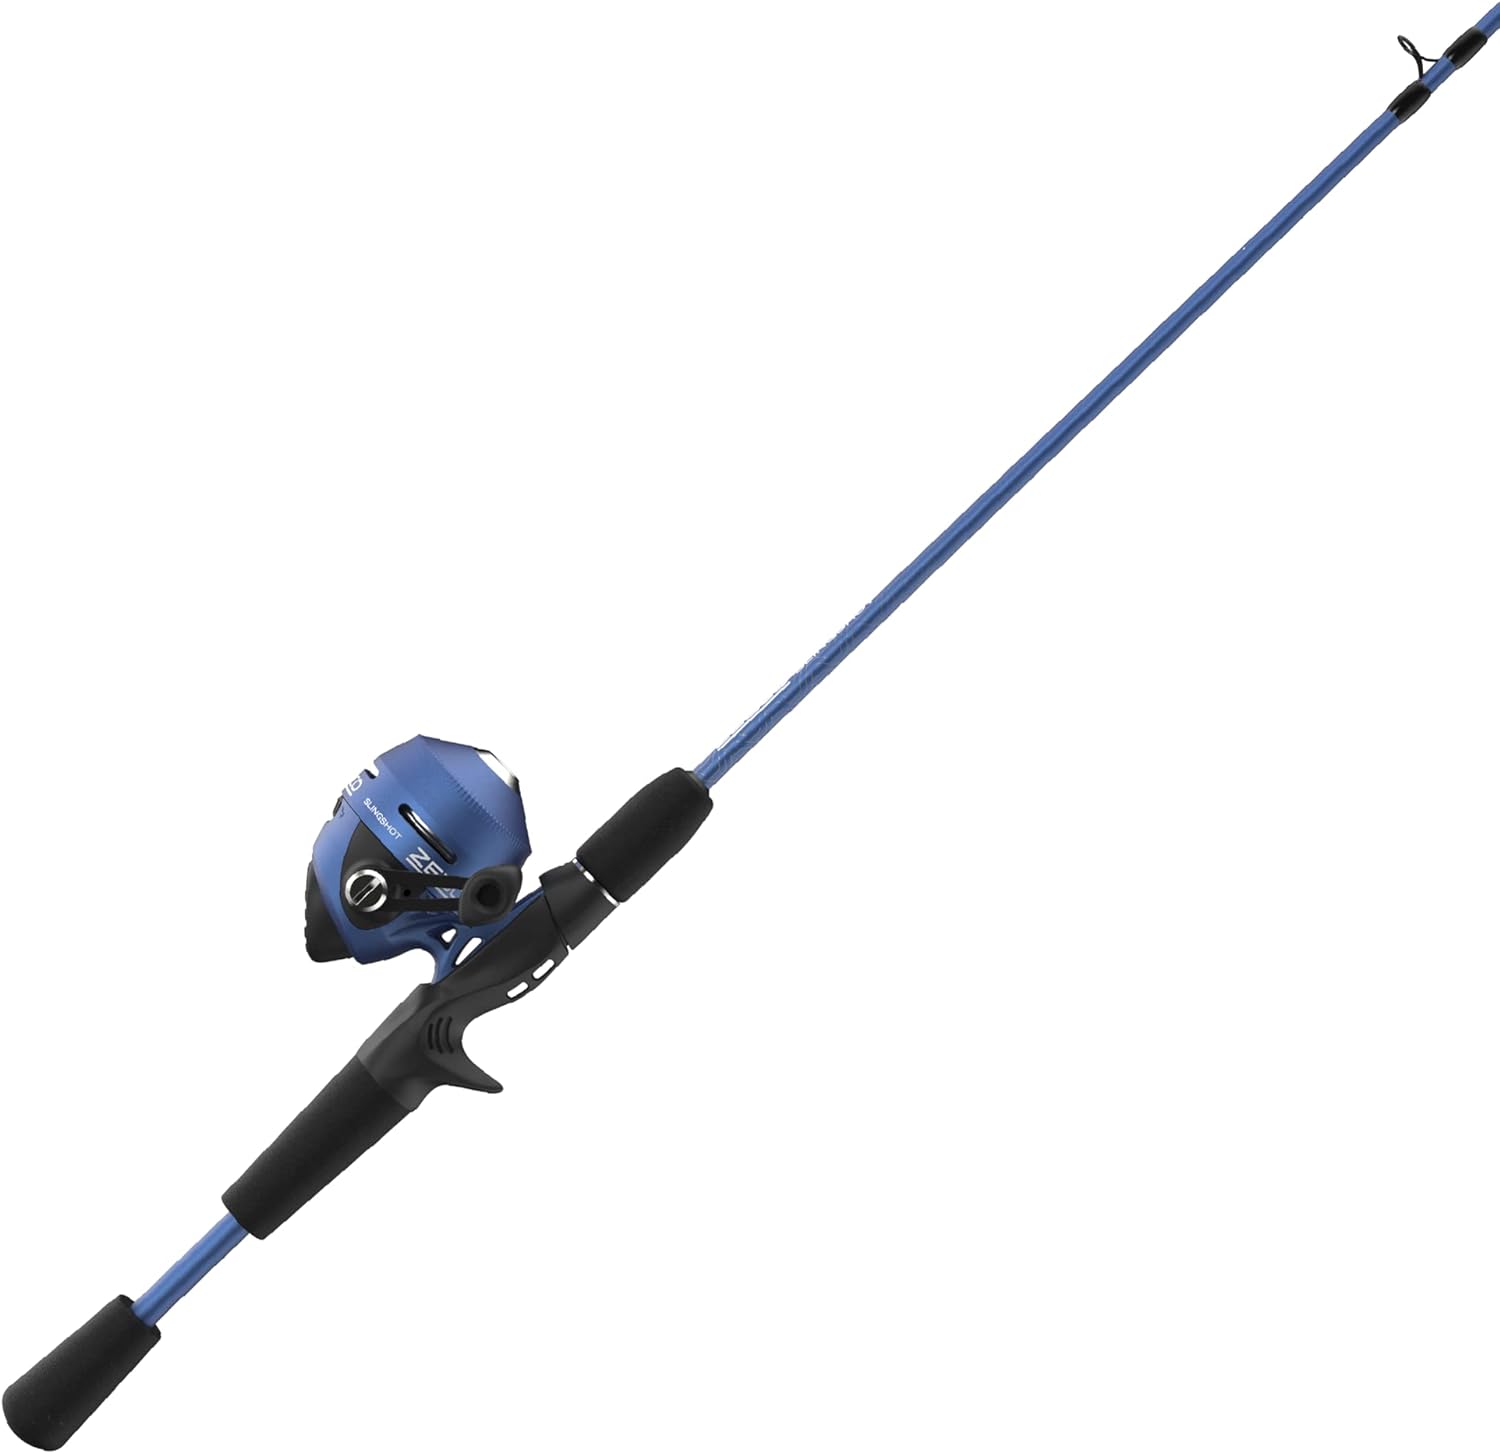 Zebco Slingshot Spincast Reel and Fishing Rod Combo, 5-Foot 6-Inch 2-Piece Fishing Pole, Size 30 Reel, Right-Hand Retrieve, Pre-Spooled with 10-Pound Zebco Line